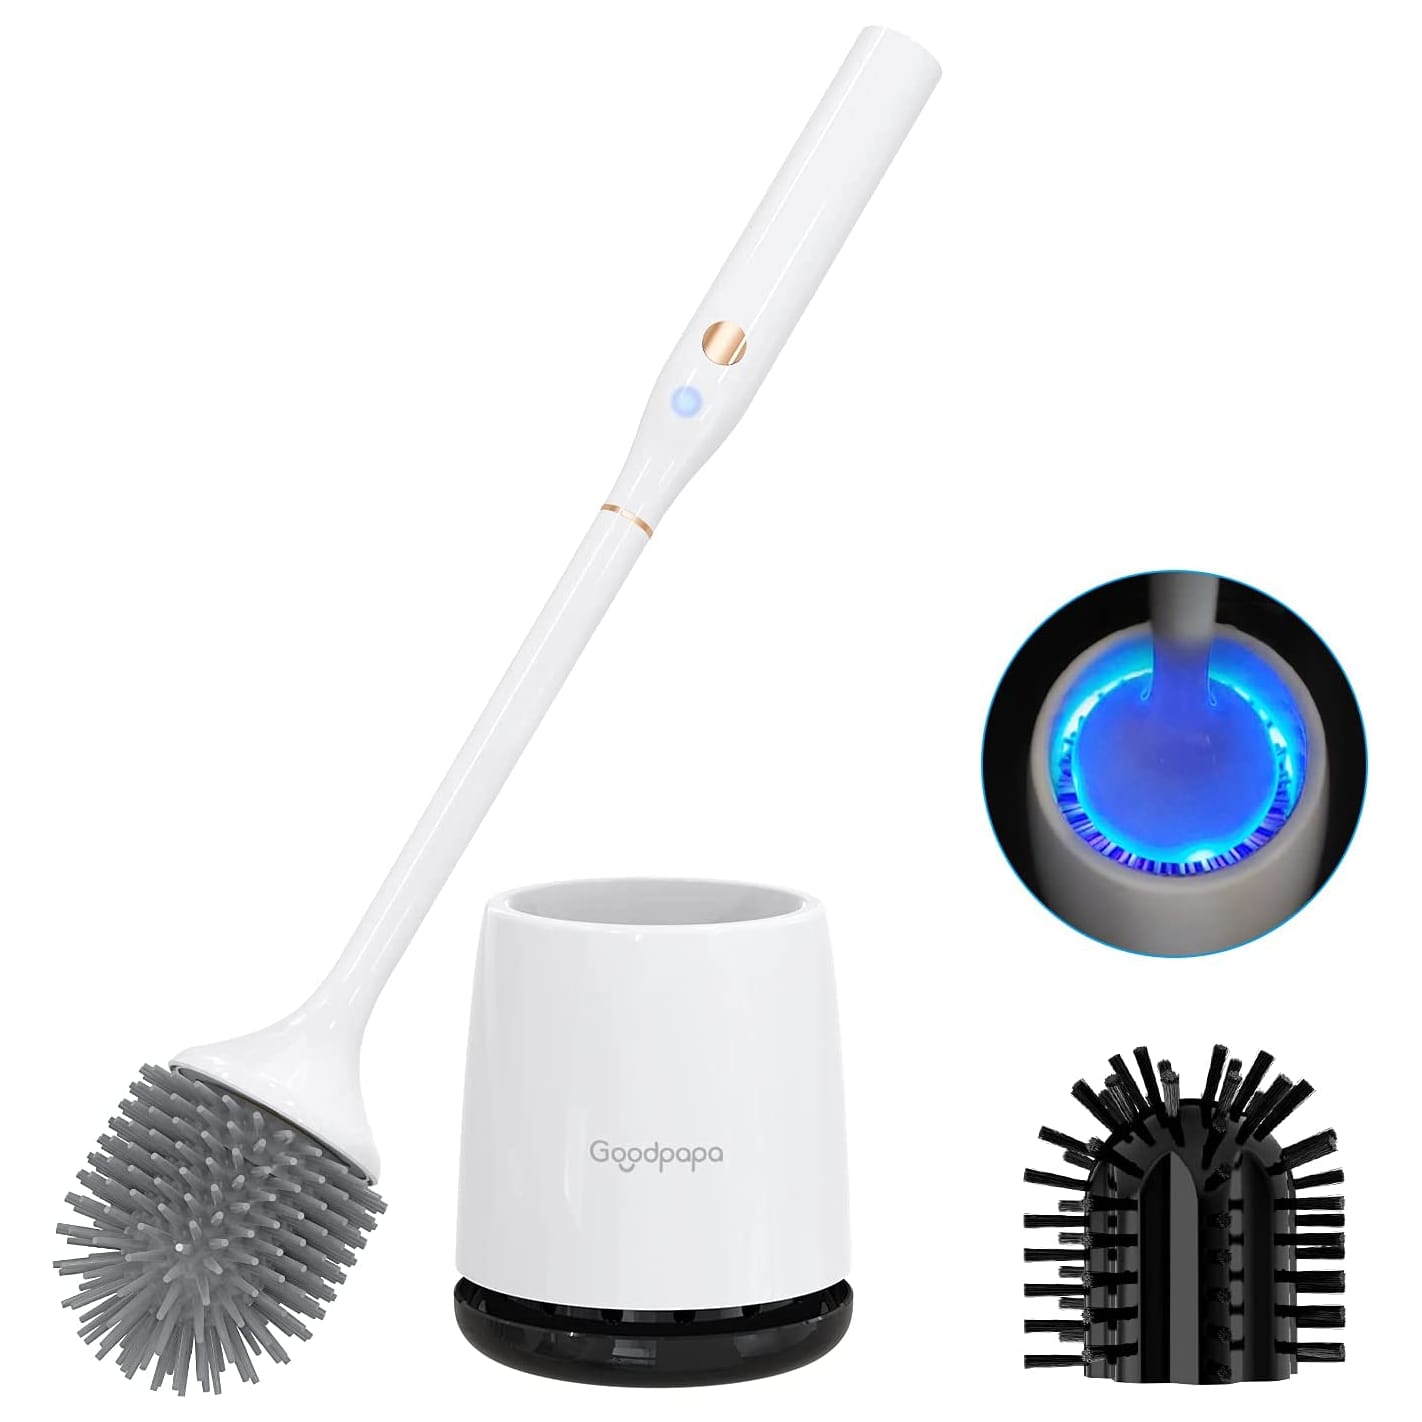 The 7 Best Toilet Brushes of 2023, Tested & Reviewed